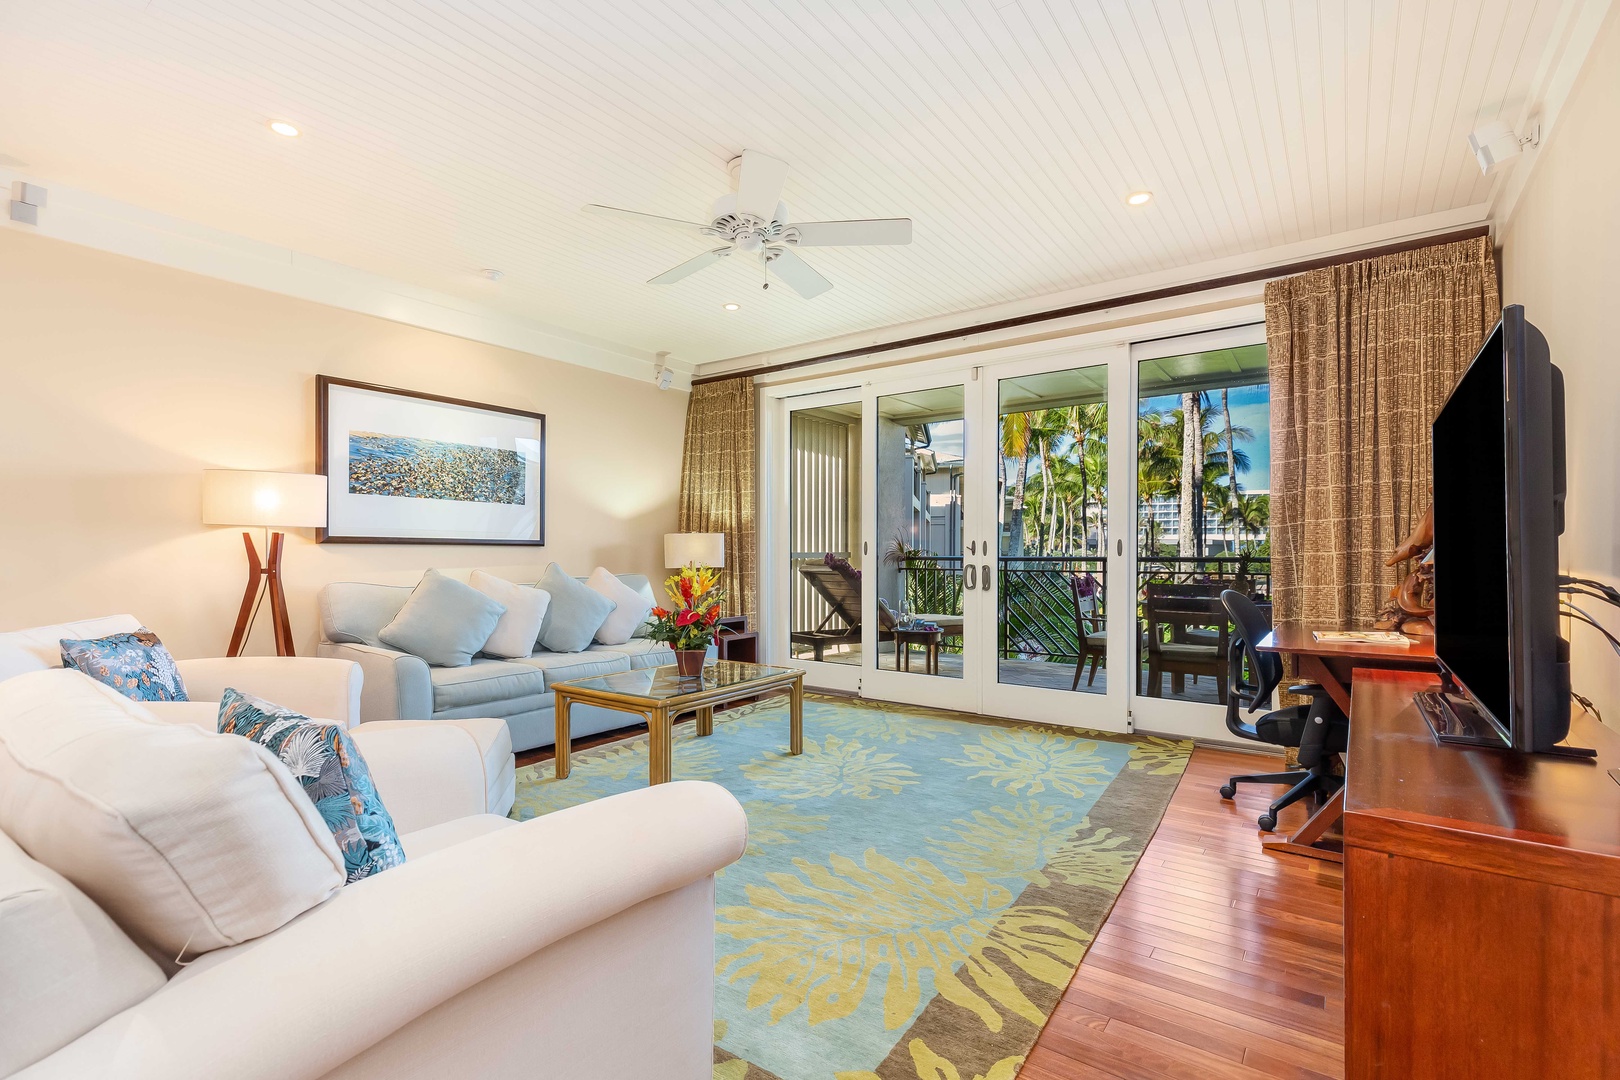 Kahuku Vacation Rentals, Turtle Bay Villas 210 - Living room with Ocean view and private patio